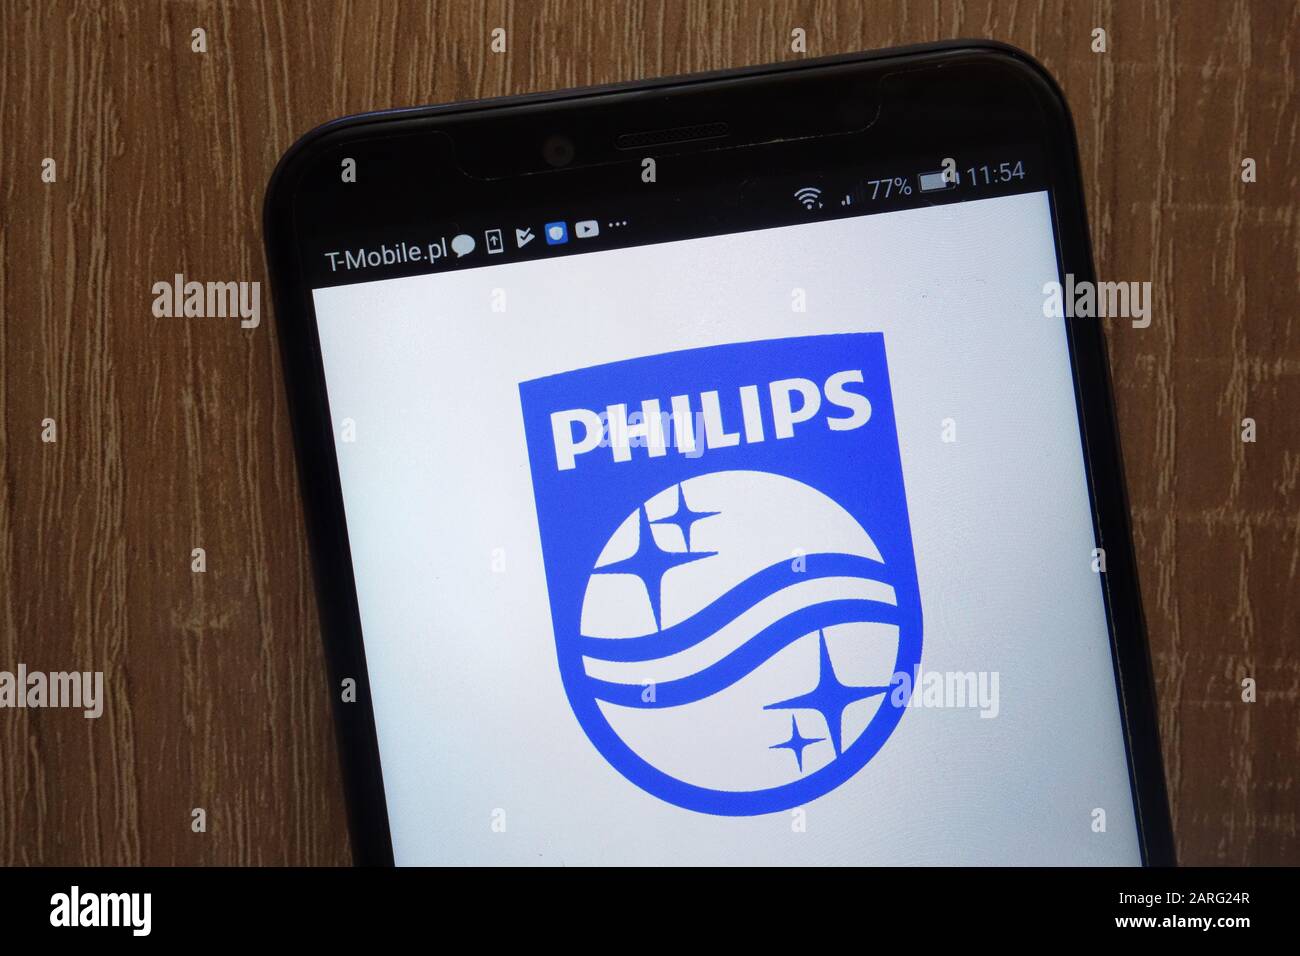 Philips logo displayed on a modern smartphone Stock Photo